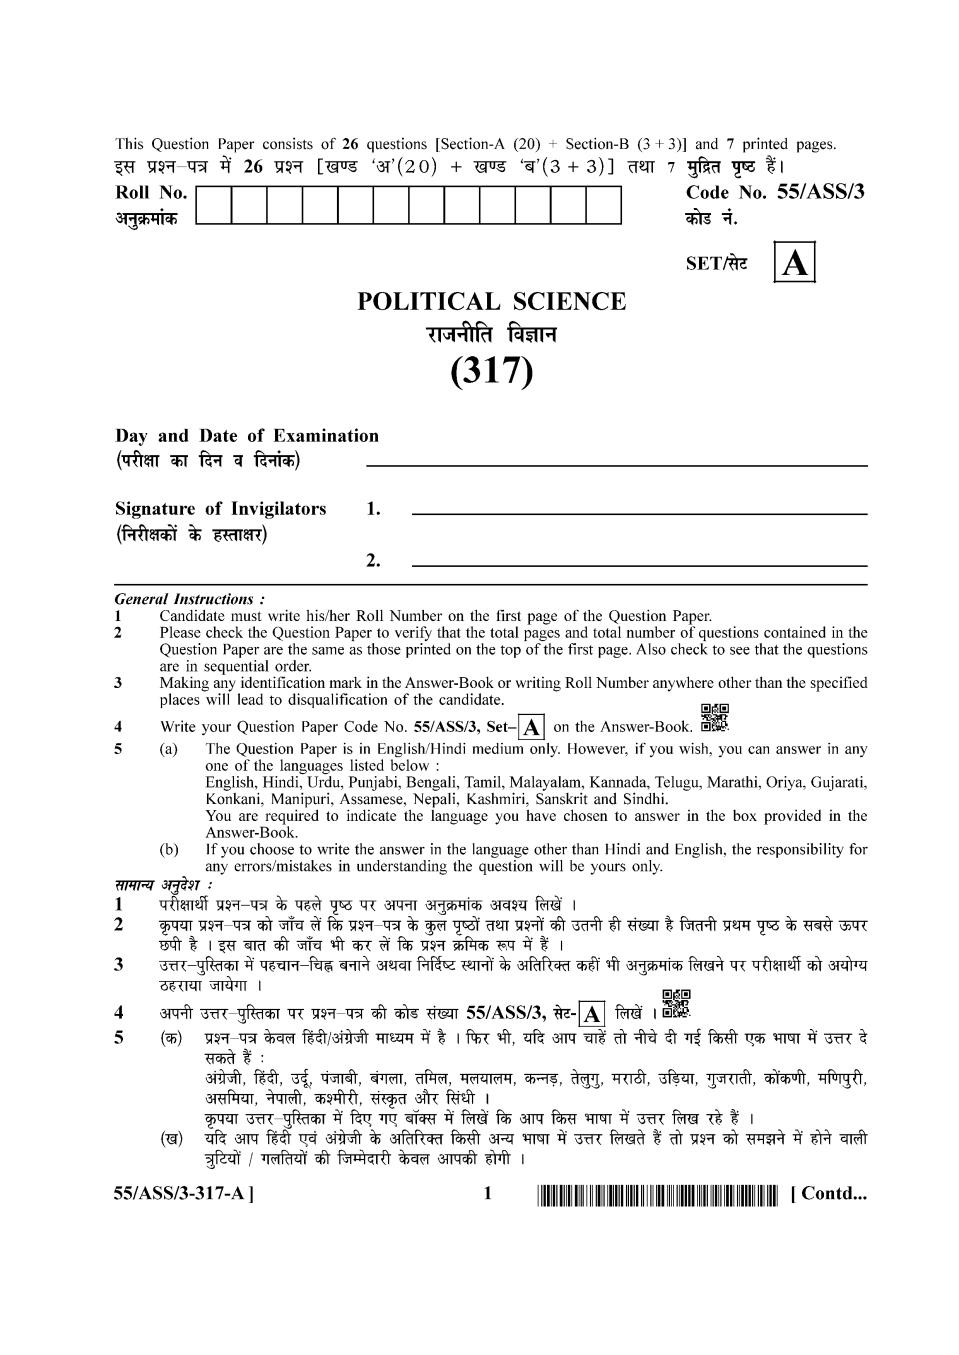 NIOS Class 12 Question Paper Oct 2017 - political Science - Page 1